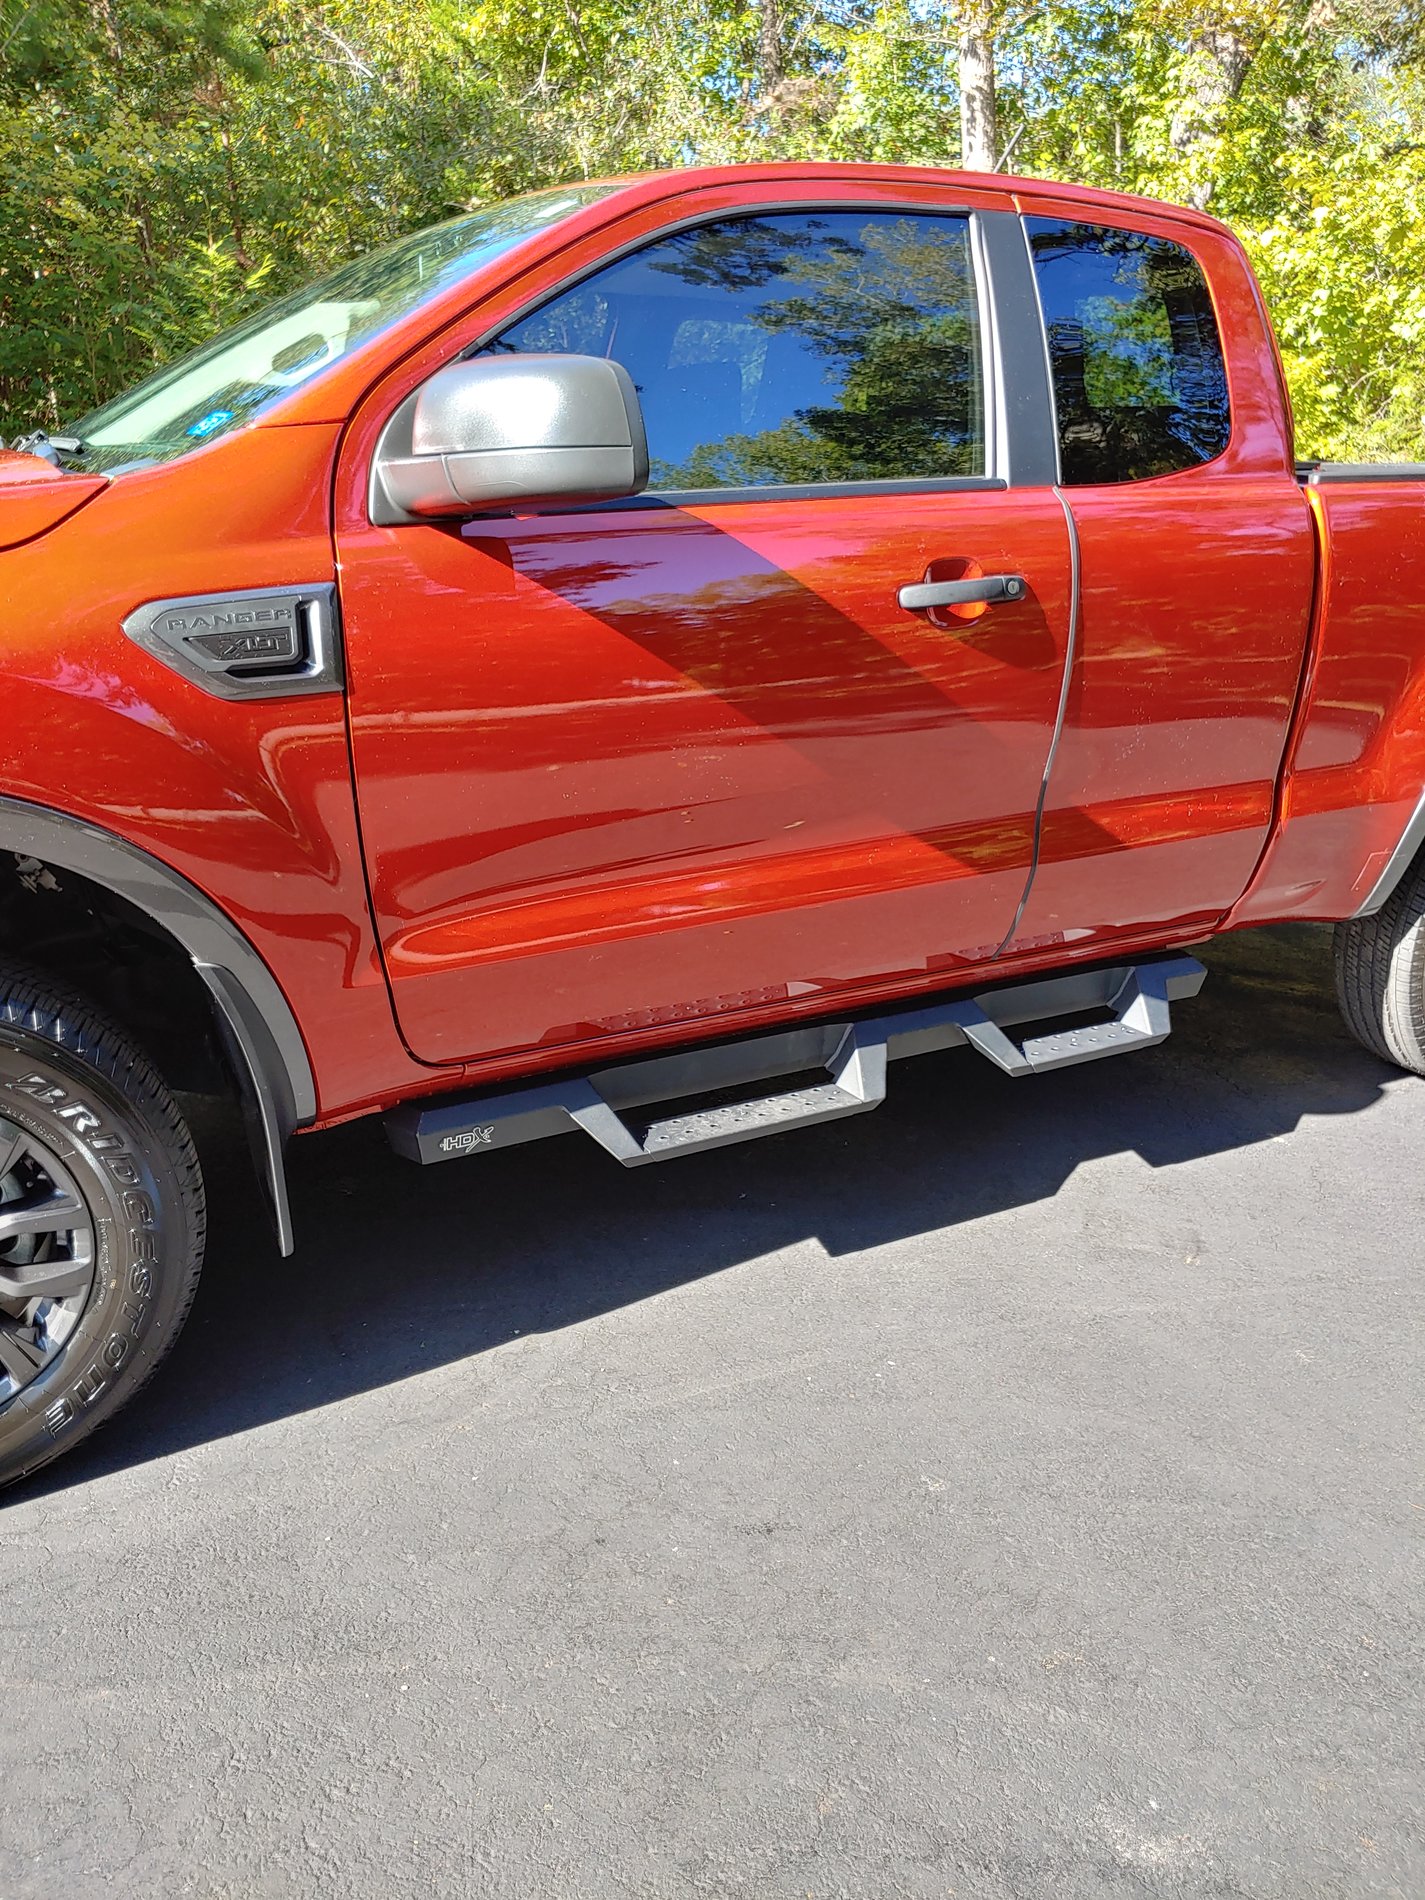 Ford Ranger Lets see your sport package trucks 20190921_163119_HDR